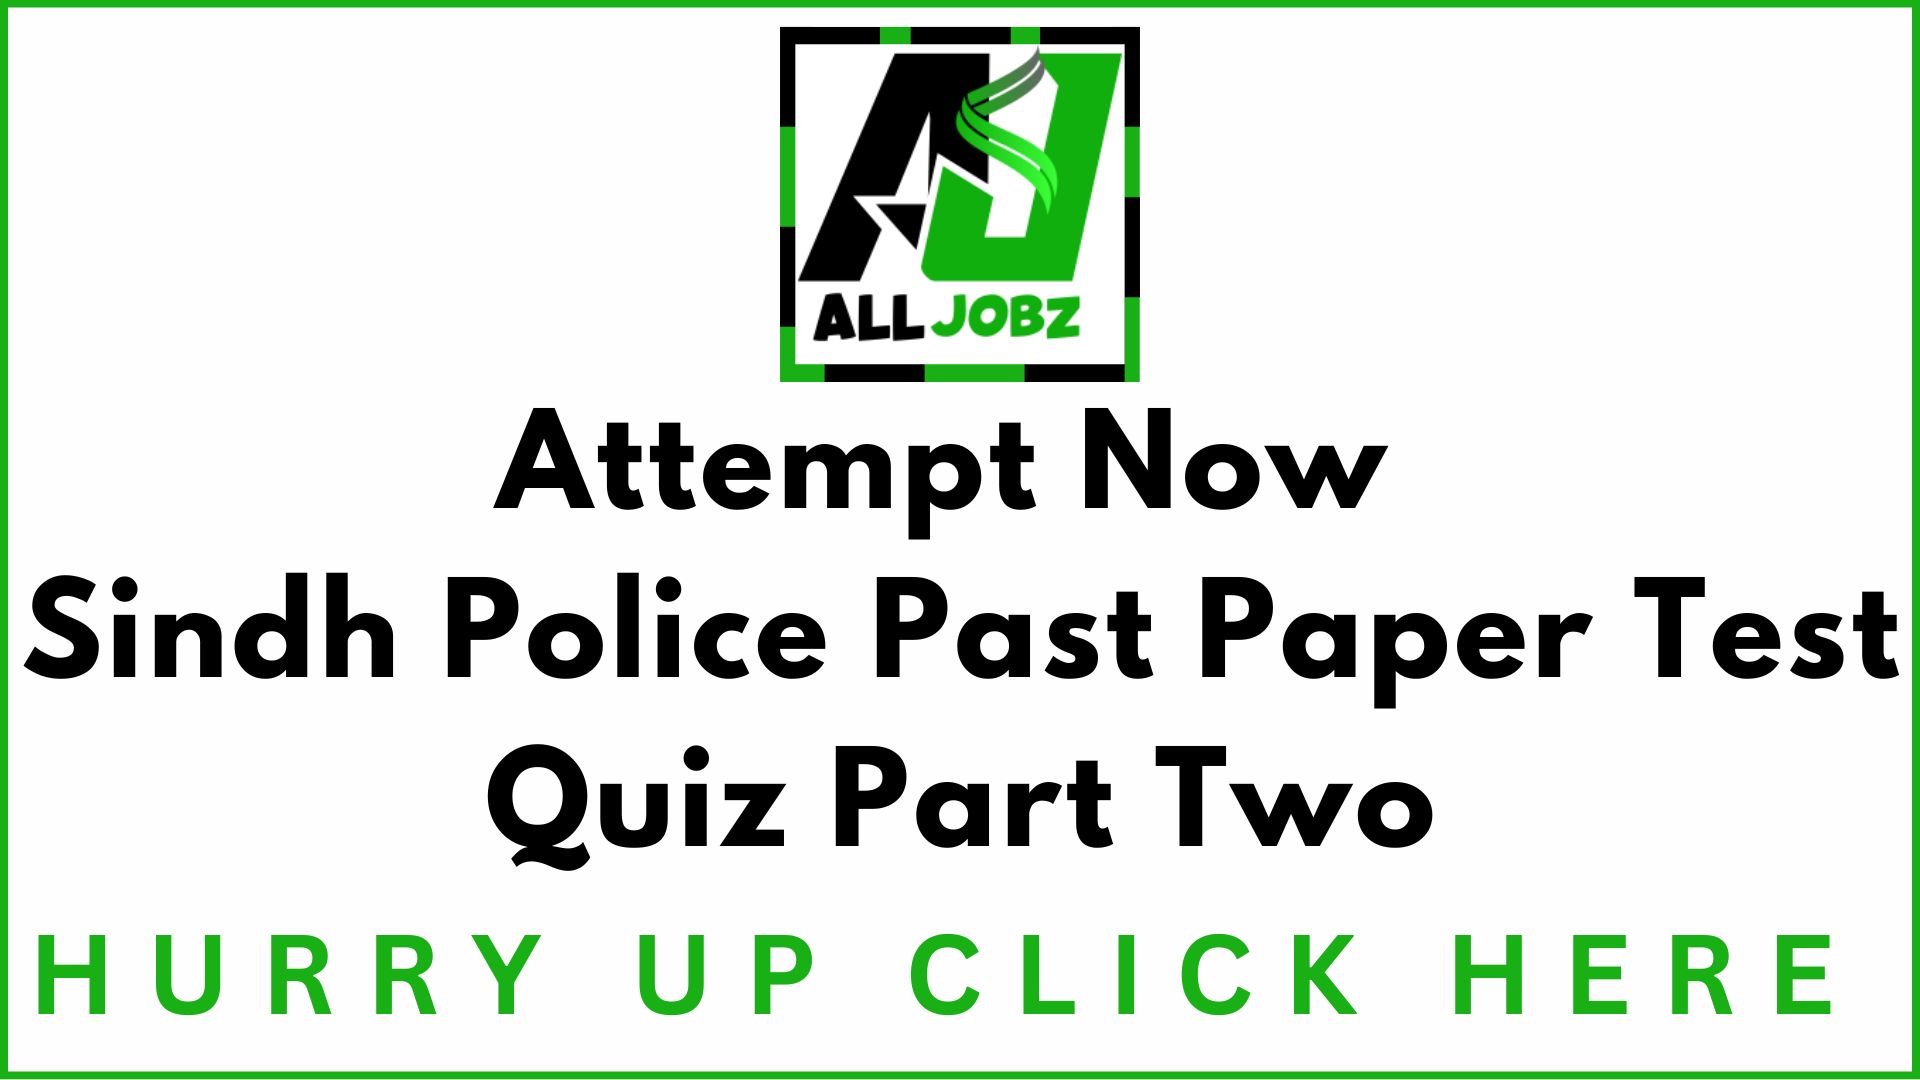 Sindh Police Written Test Past Papers Quiz Test Part Two, Essential Resources For Sindh Police Written Test Preparation, Sindh Police Written Test Questions Pdf, Sindh Police Past Paper Quiz Test With Answers Pdf, Sindh Police Past Paper Quiz Test With Answers, Sindh Police Past Paper Quiz Test Pdf Download, Sindh Police Past Paper Quiz Test Pdf, Sts Sindh Police Sample Paper Pdf Download, Sindh Police Written Test Mcqs, Sindh Police Past Paper Quiz Test 2024,